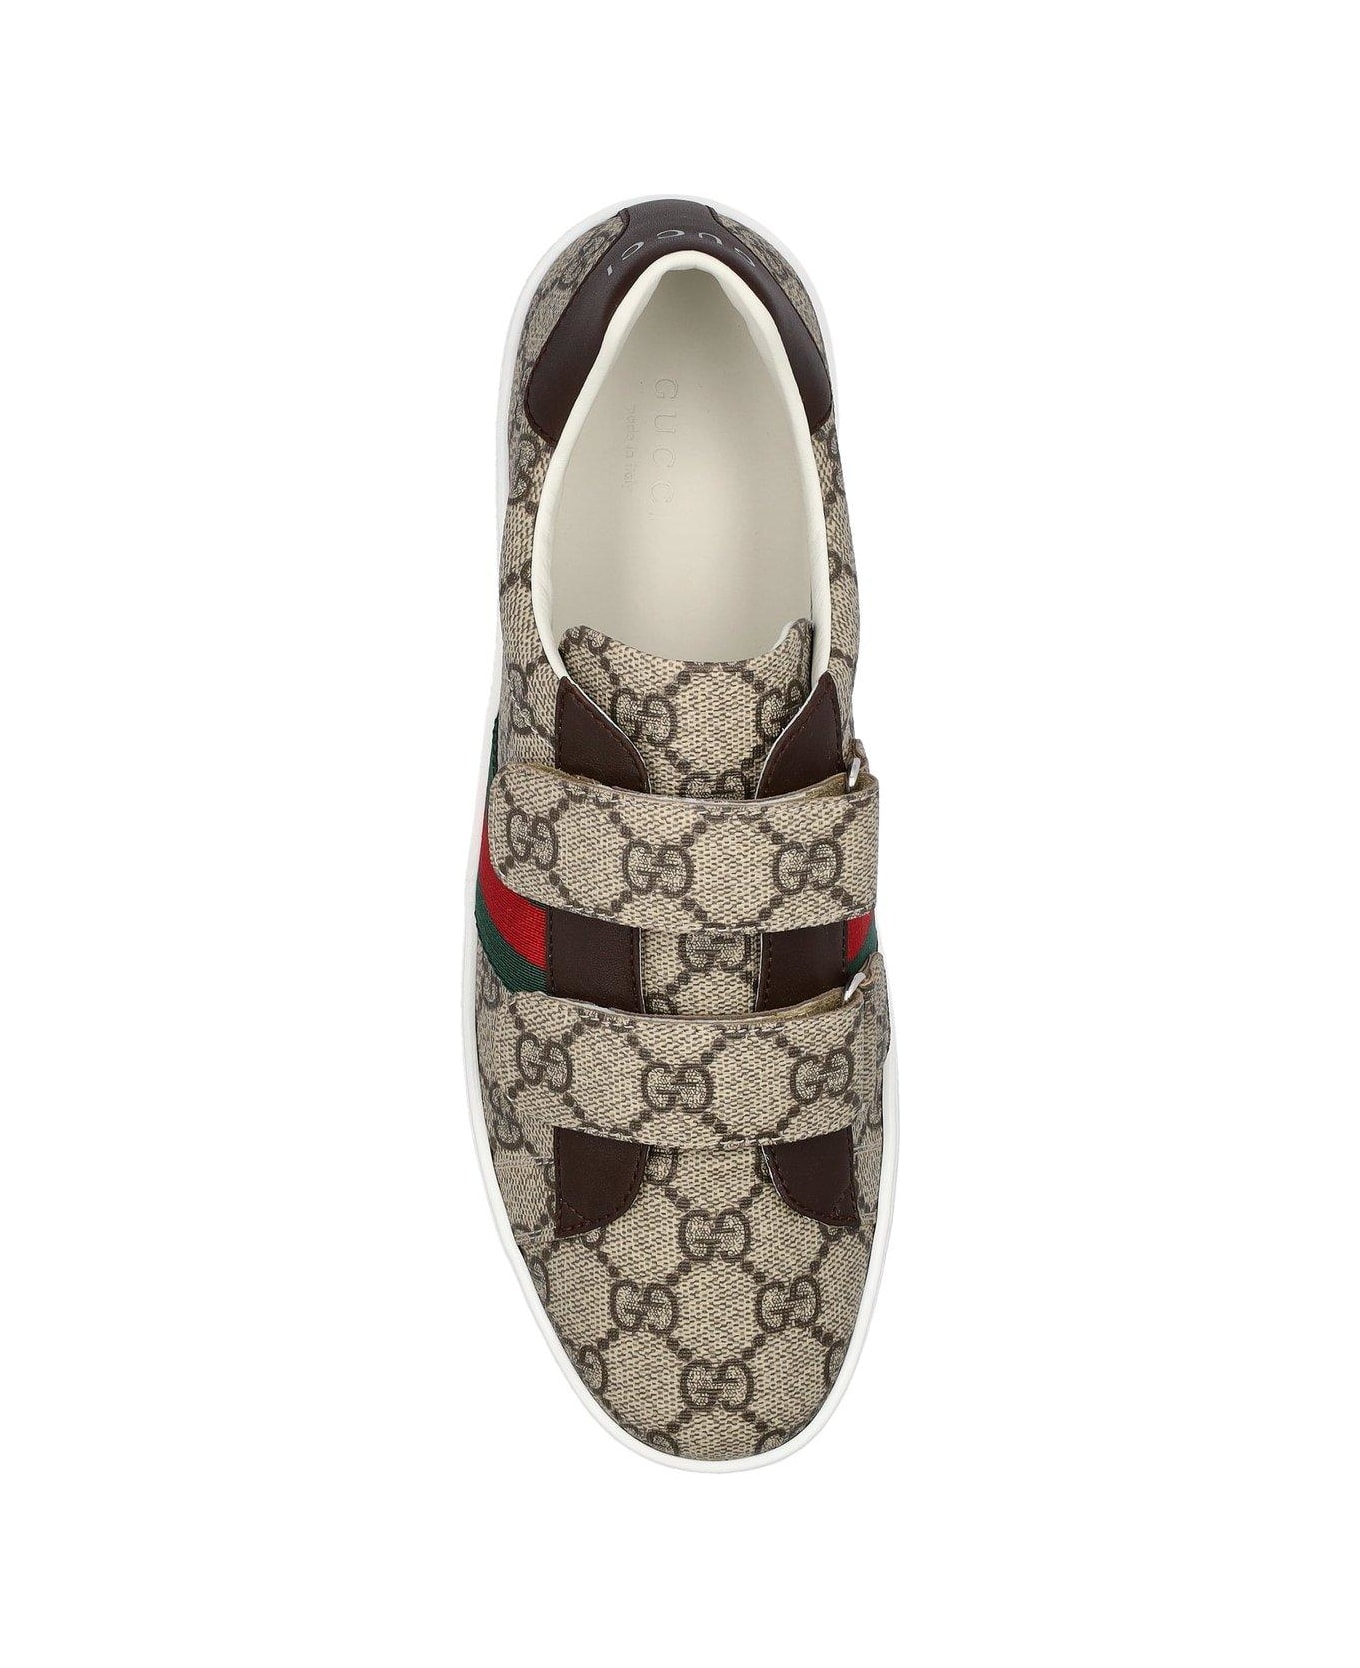 Gucci Ace Logo Printed Sneakers - BEIGE